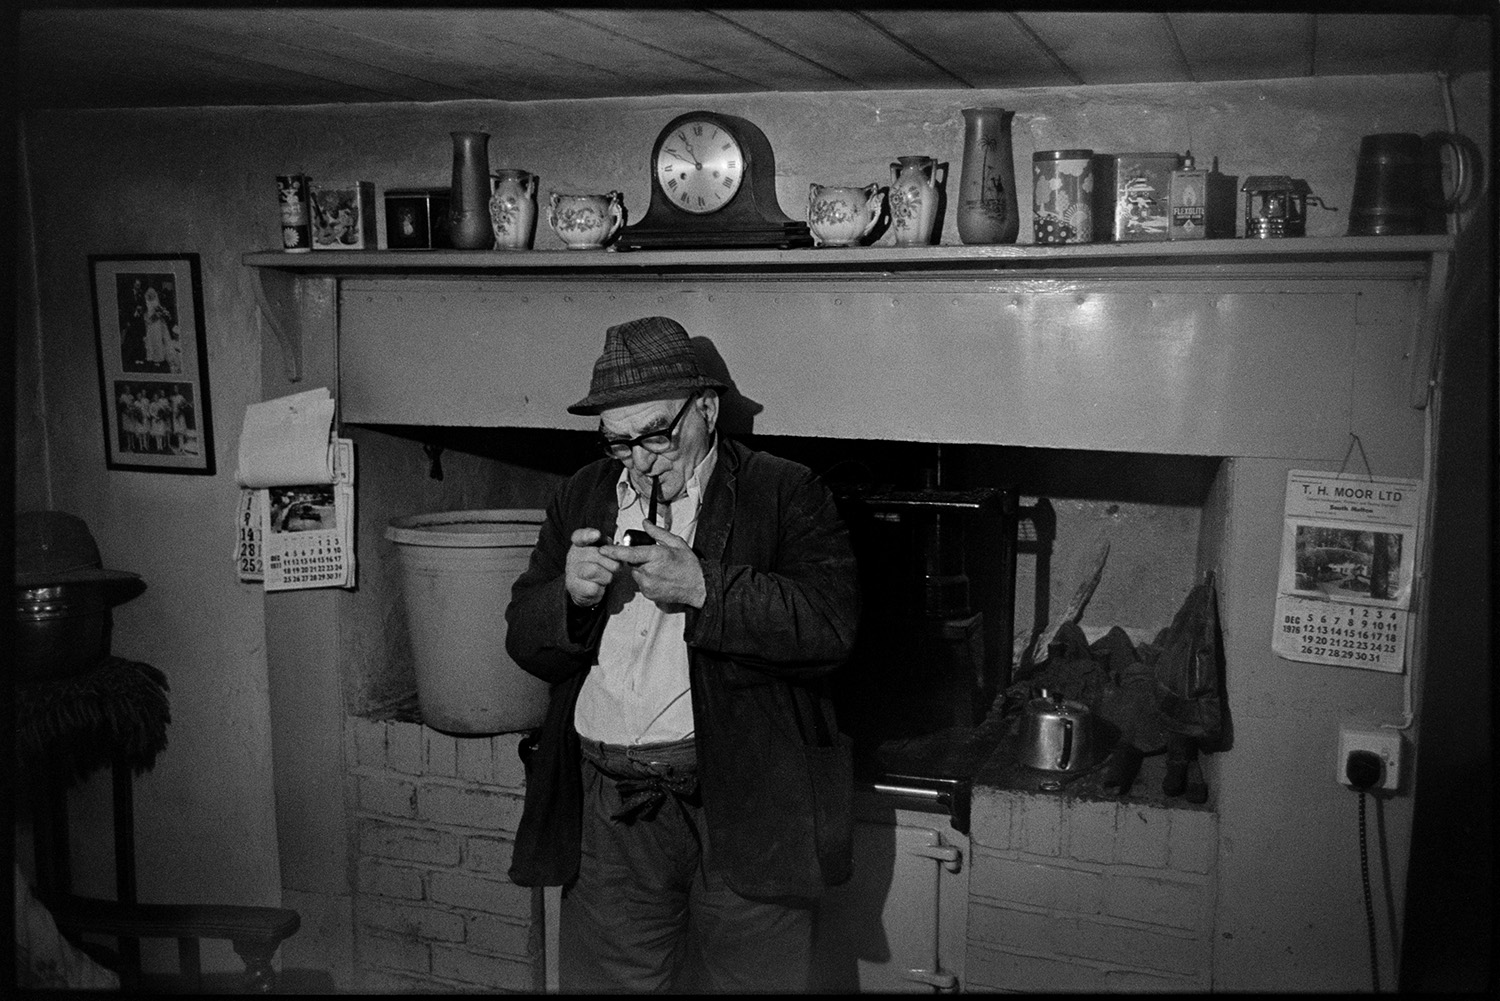 Man lighting pipe in front of mantelpiece. 
[Archie Parkhouse lighting his pipe in his kitchen at Millhams, Dolton. A rayburn stove and mantelpiece can be seen in the background. A clock and china vases are displayed on the mantelpiece.]